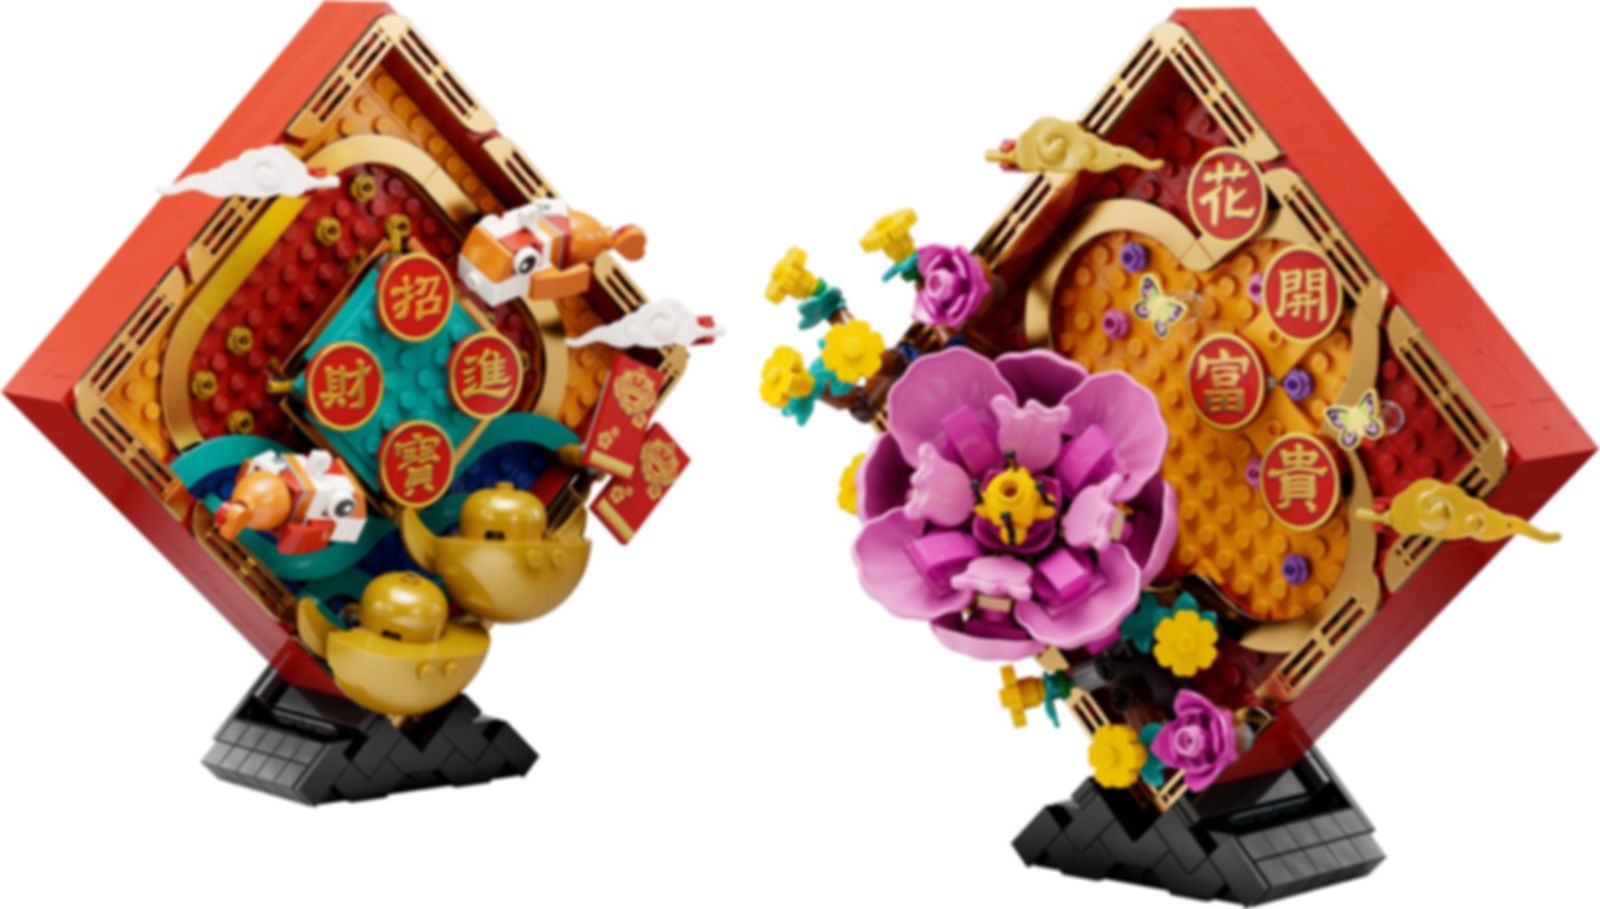 Lunar New Year Display components